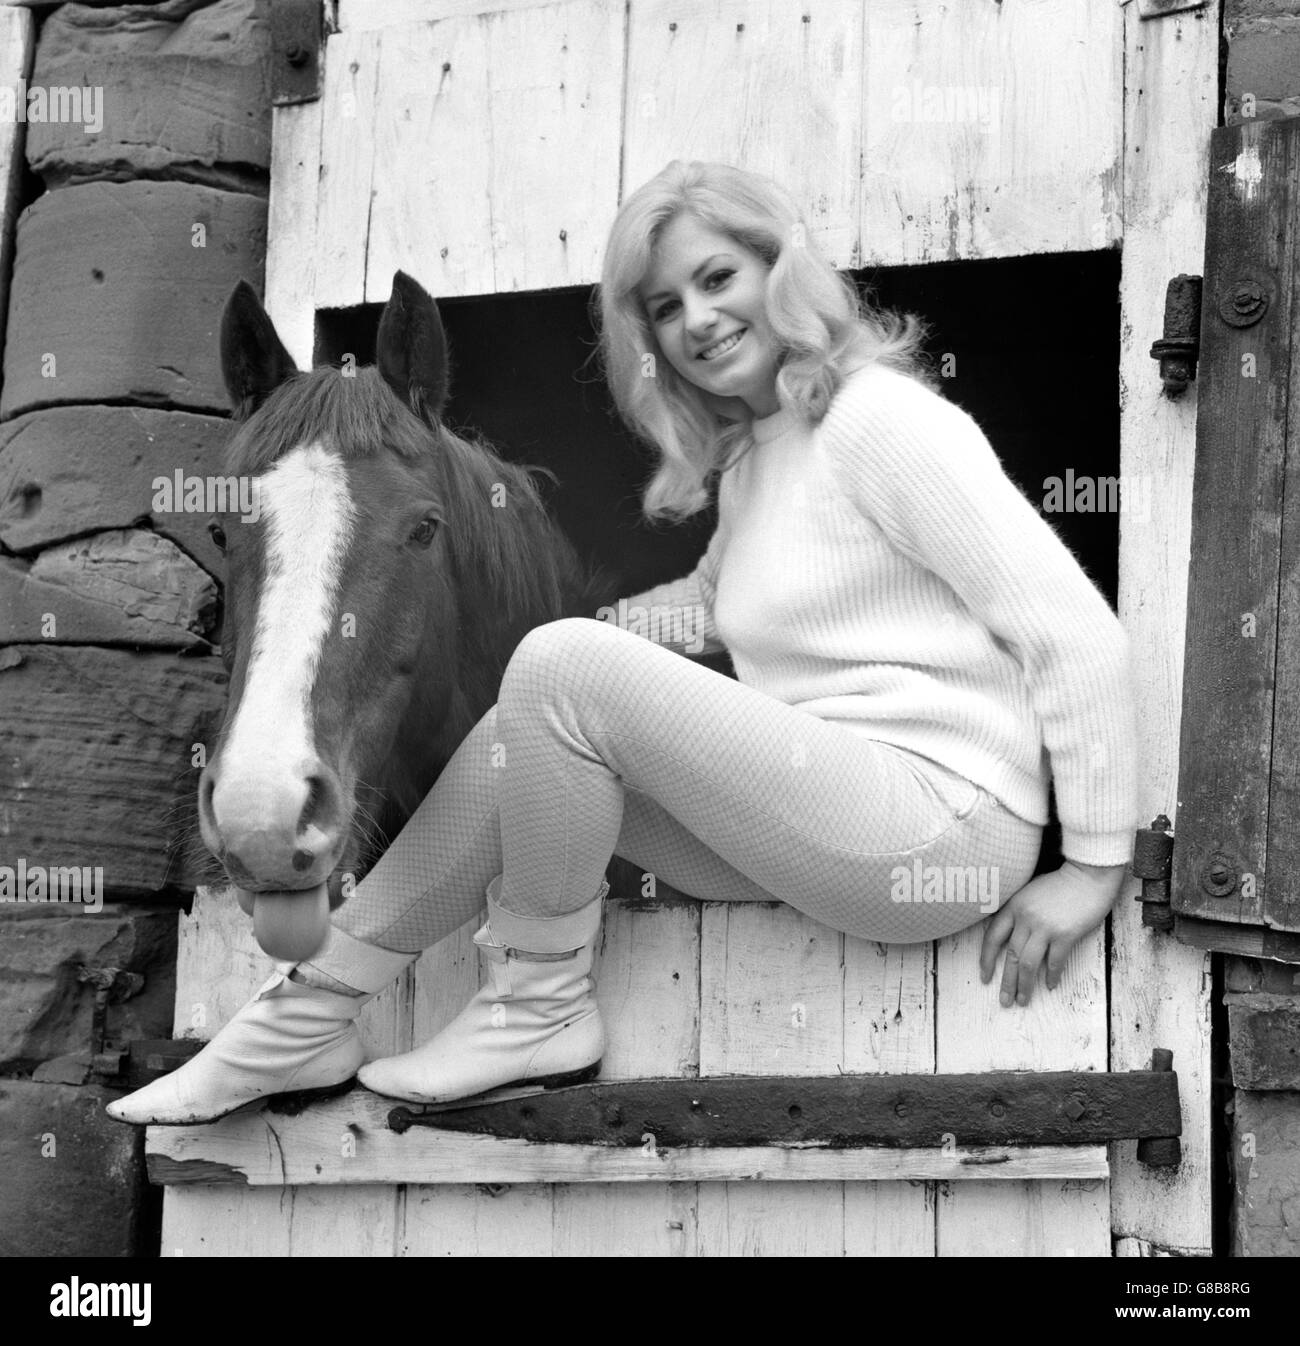 Farmer's daughter Barbara Hadfield, 18, who has decided to spend less time in the saddle with the Barlow Hunt in order to give herself a better chance in beauty contests. She says hunting was adding inches where they were not wanted. At her home in Bowshaw Farm, Dronfield, near Sheffield, she said: 'This season I'm rationing myself to only three appearances with the Hunt. It is common sense, really, that bouncing up and down in the saddle can play havoc with a girl's figure.' Barbara models for a Manchester agency, and feels that a few beauty titles would help her career. Stock Photo